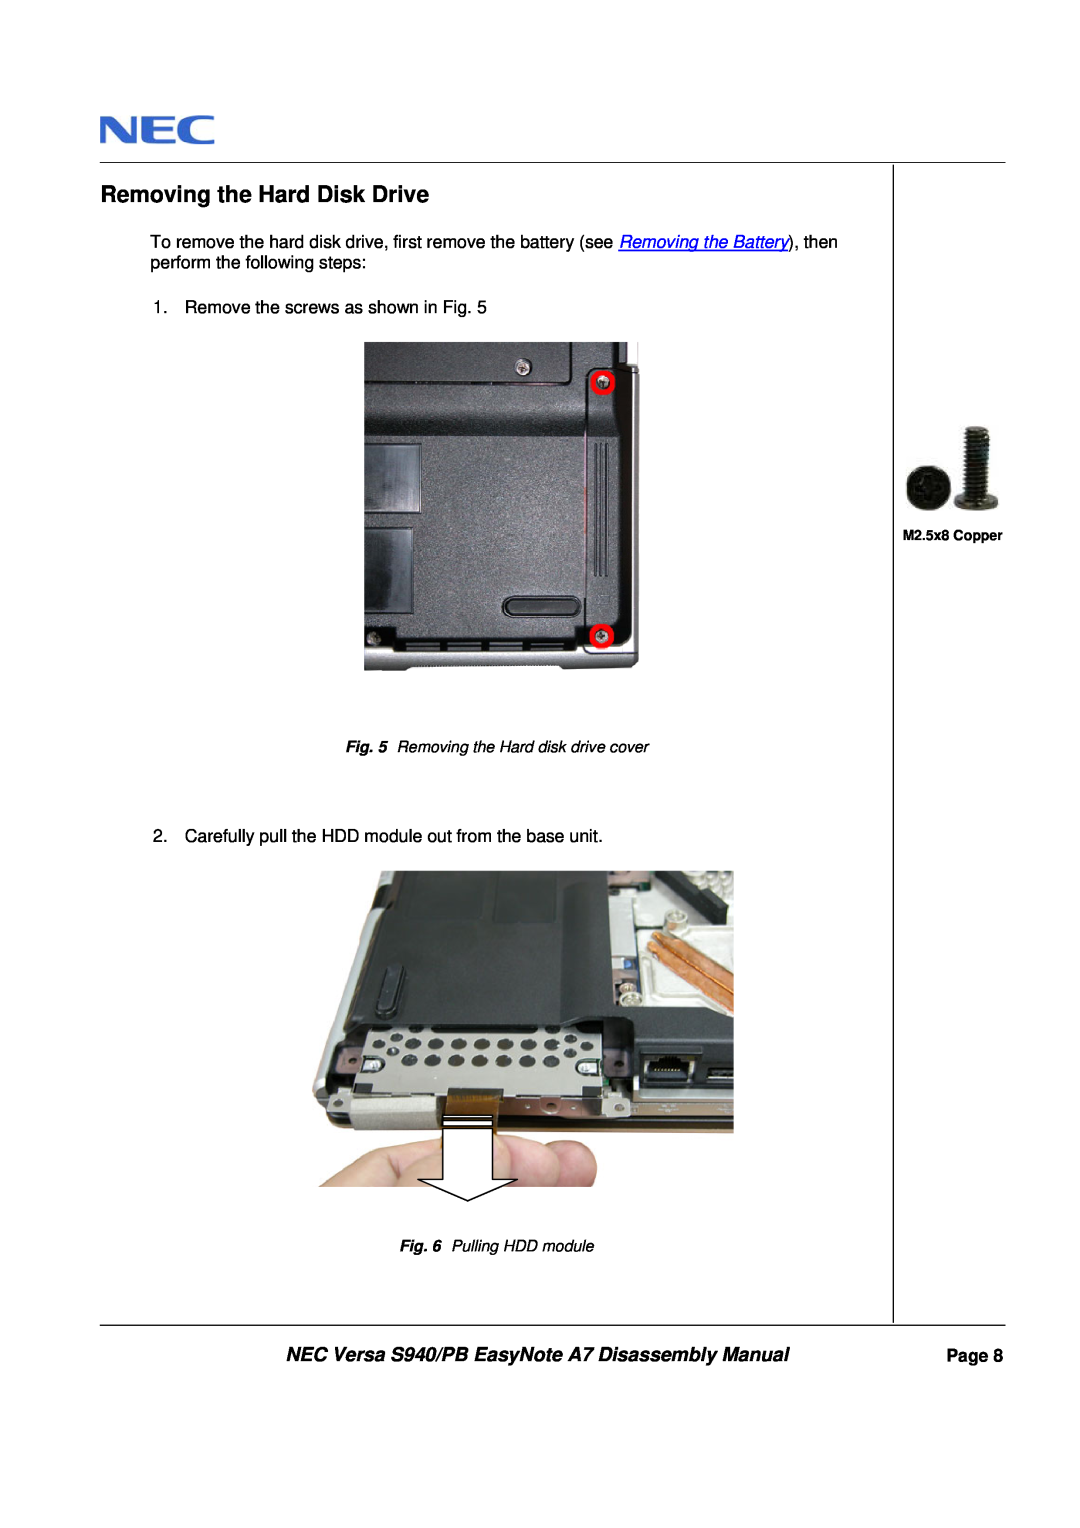 Packard Bell Removing the Hard Disk Drive, NEC Versa S940/PB EasyNote A7 Disassembly Manual, Pulling HDD module, Page 